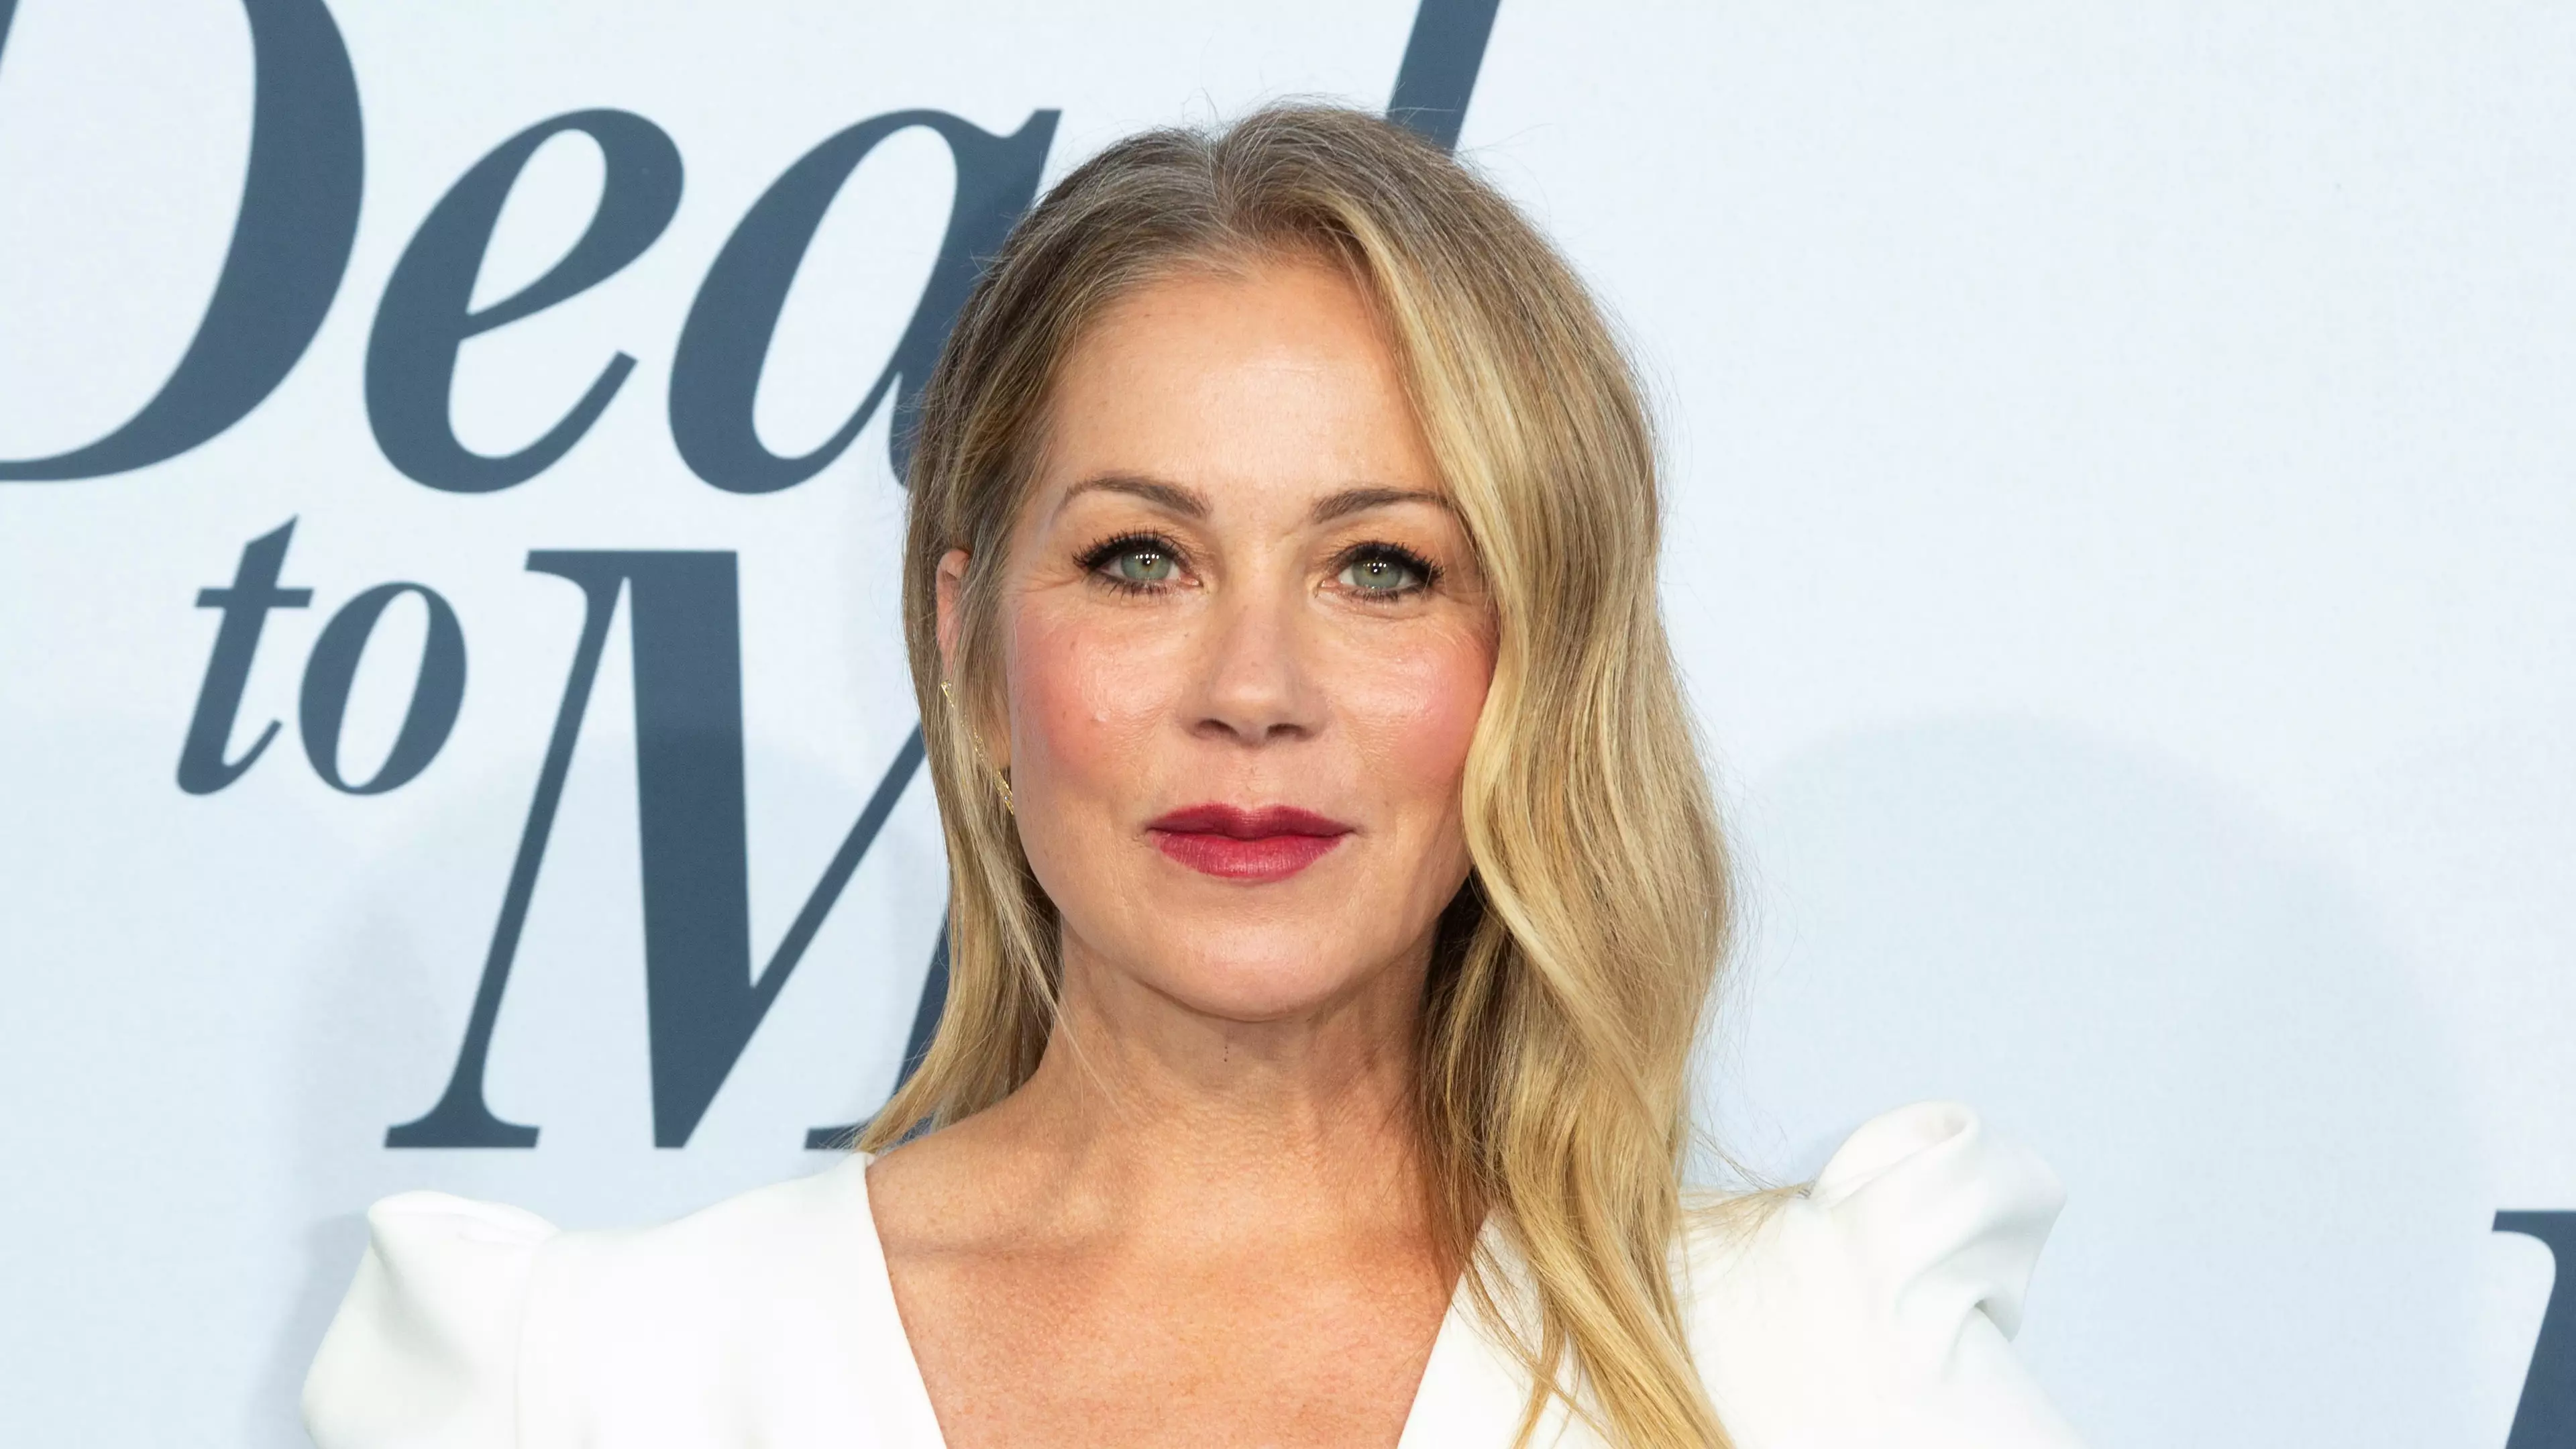 Christina Applegate Included Her Own Breast Cancer Diagnosis In 'Dead To Me'